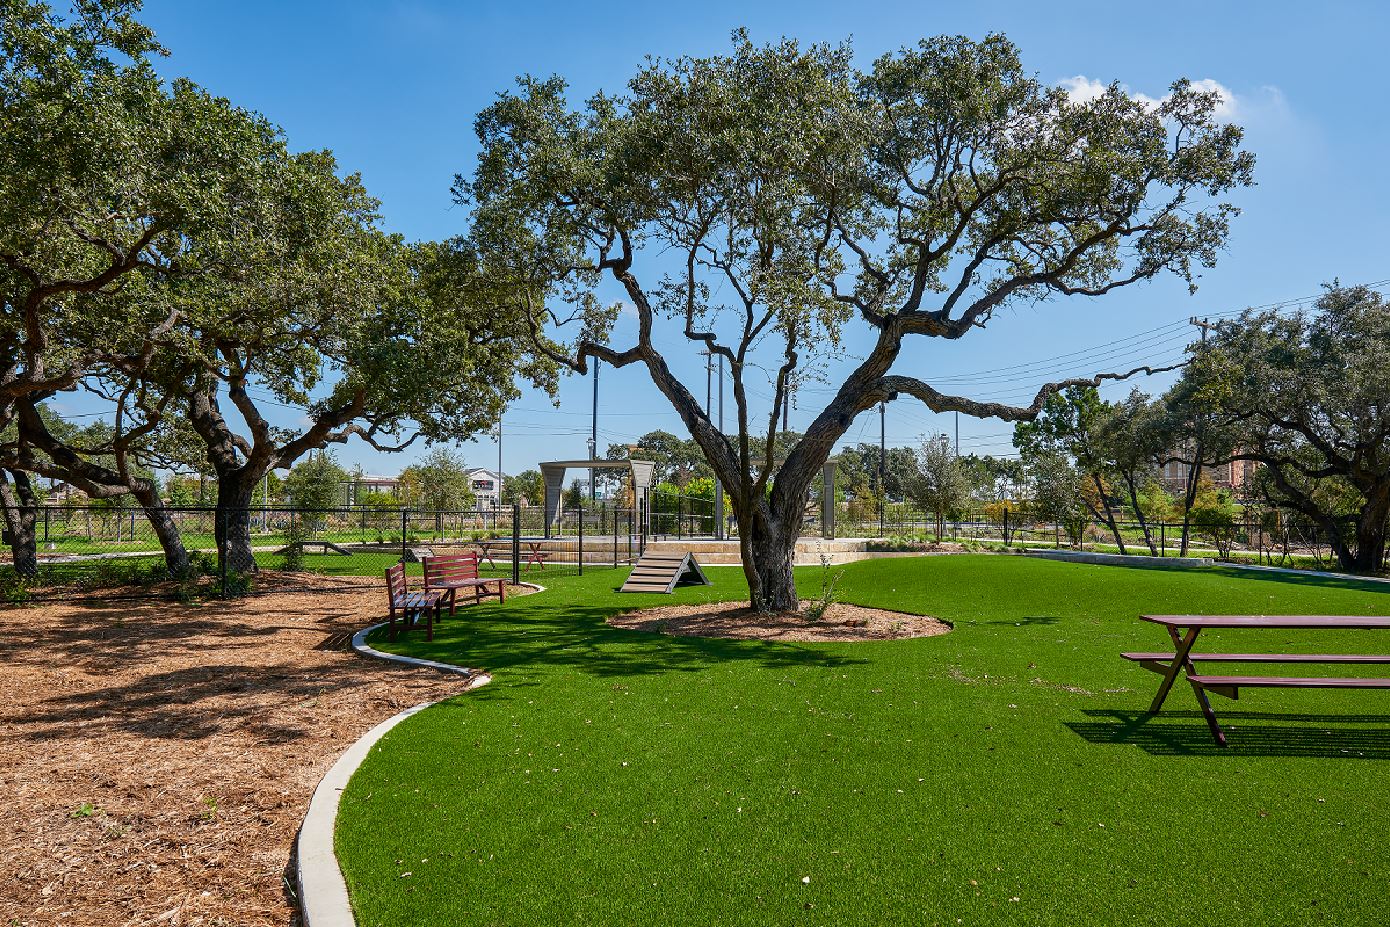 La Cantera Dog Park with grass, picnic tables, benches and shade trees